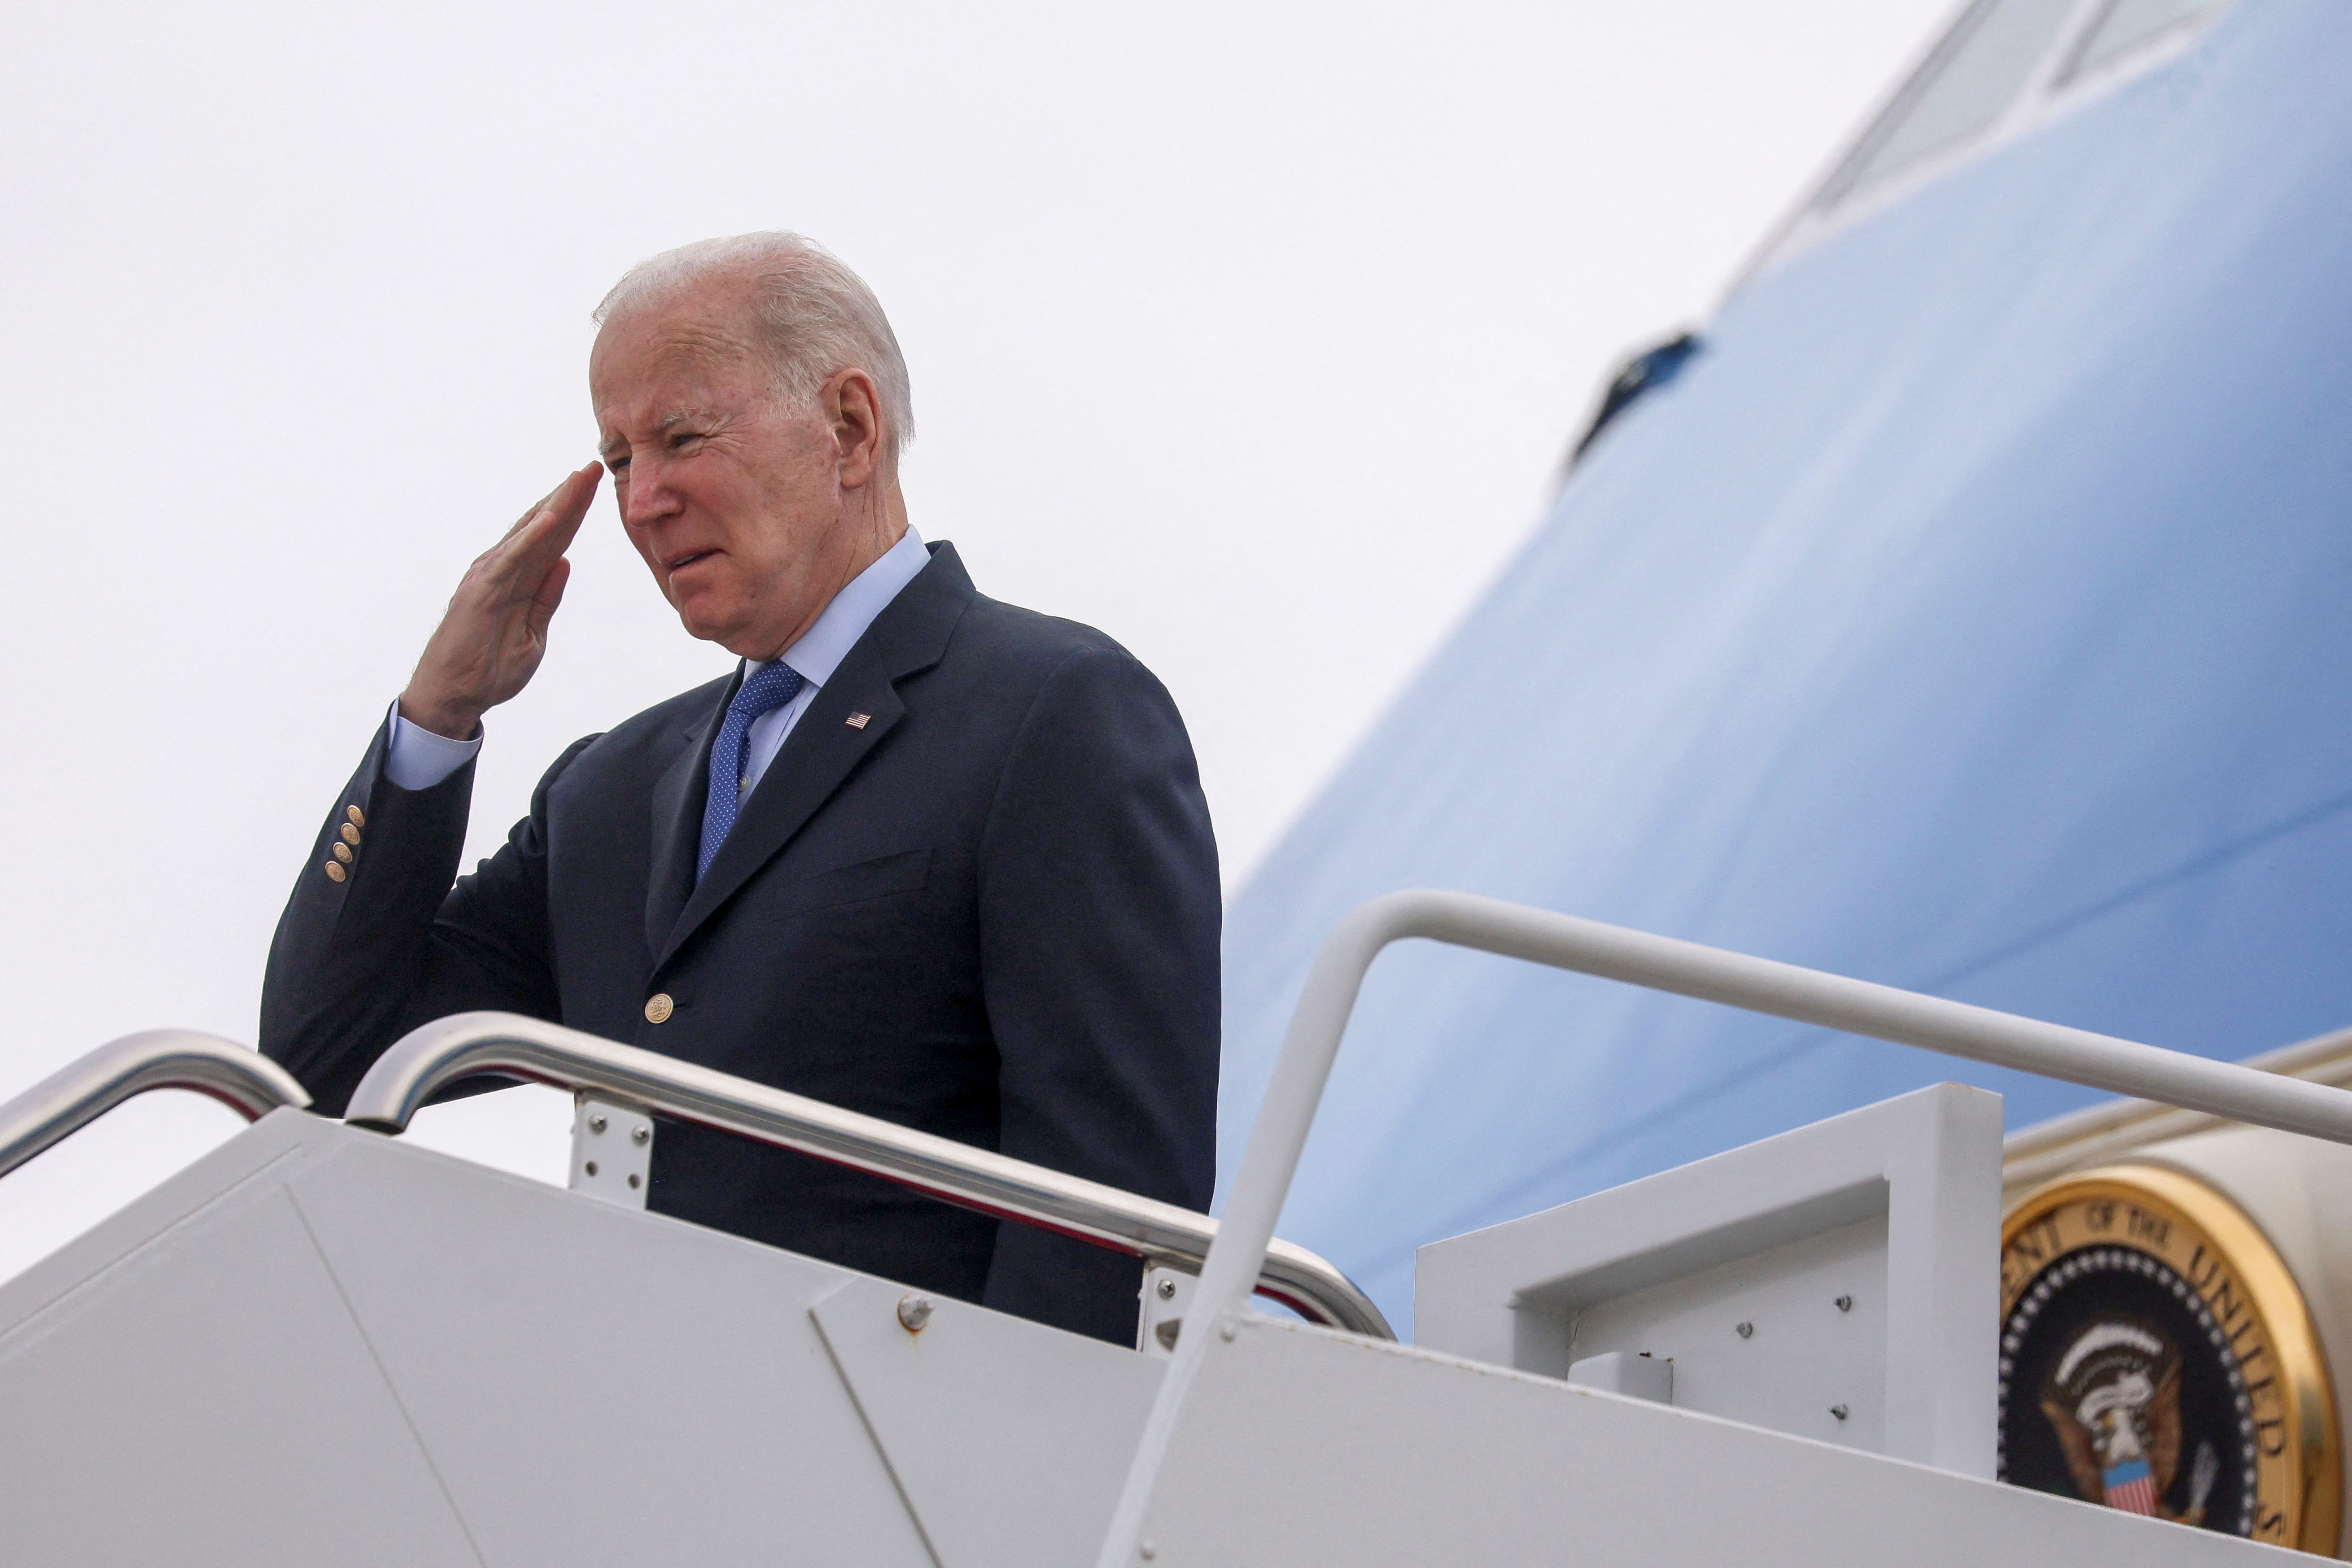 U.S. President Biden boards Air Force One at Joint Base Andrews en route to Brussels